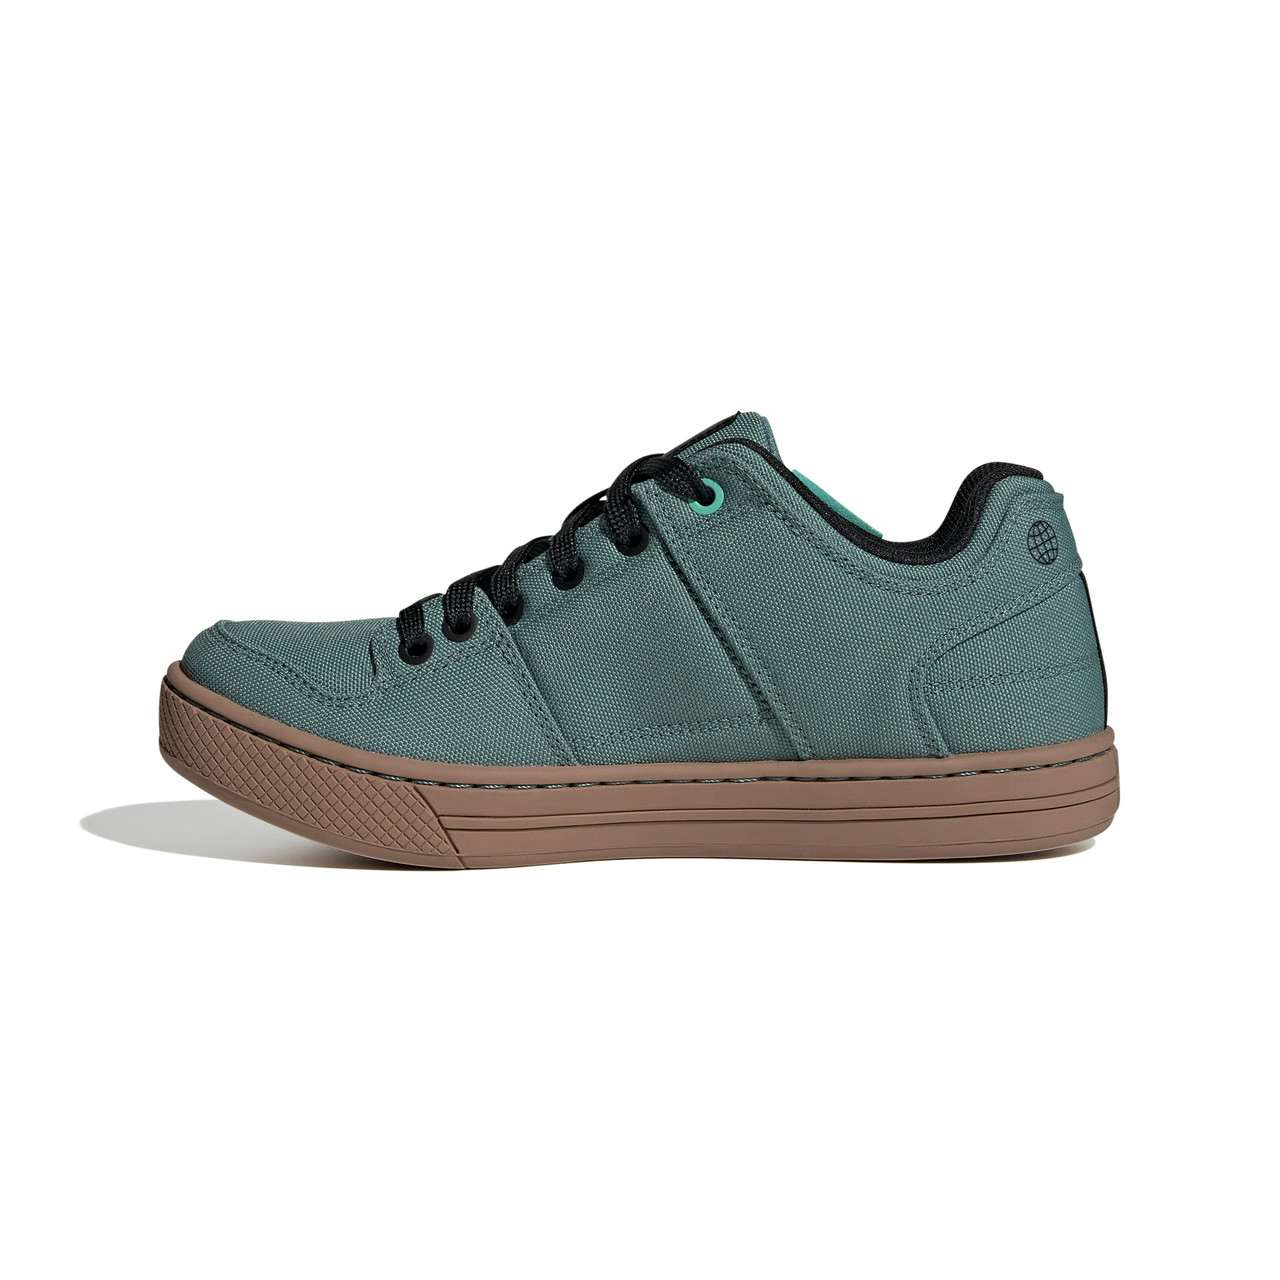 Freerider Canvas Cycling Shoes Hazy Emerald/Core Black/A